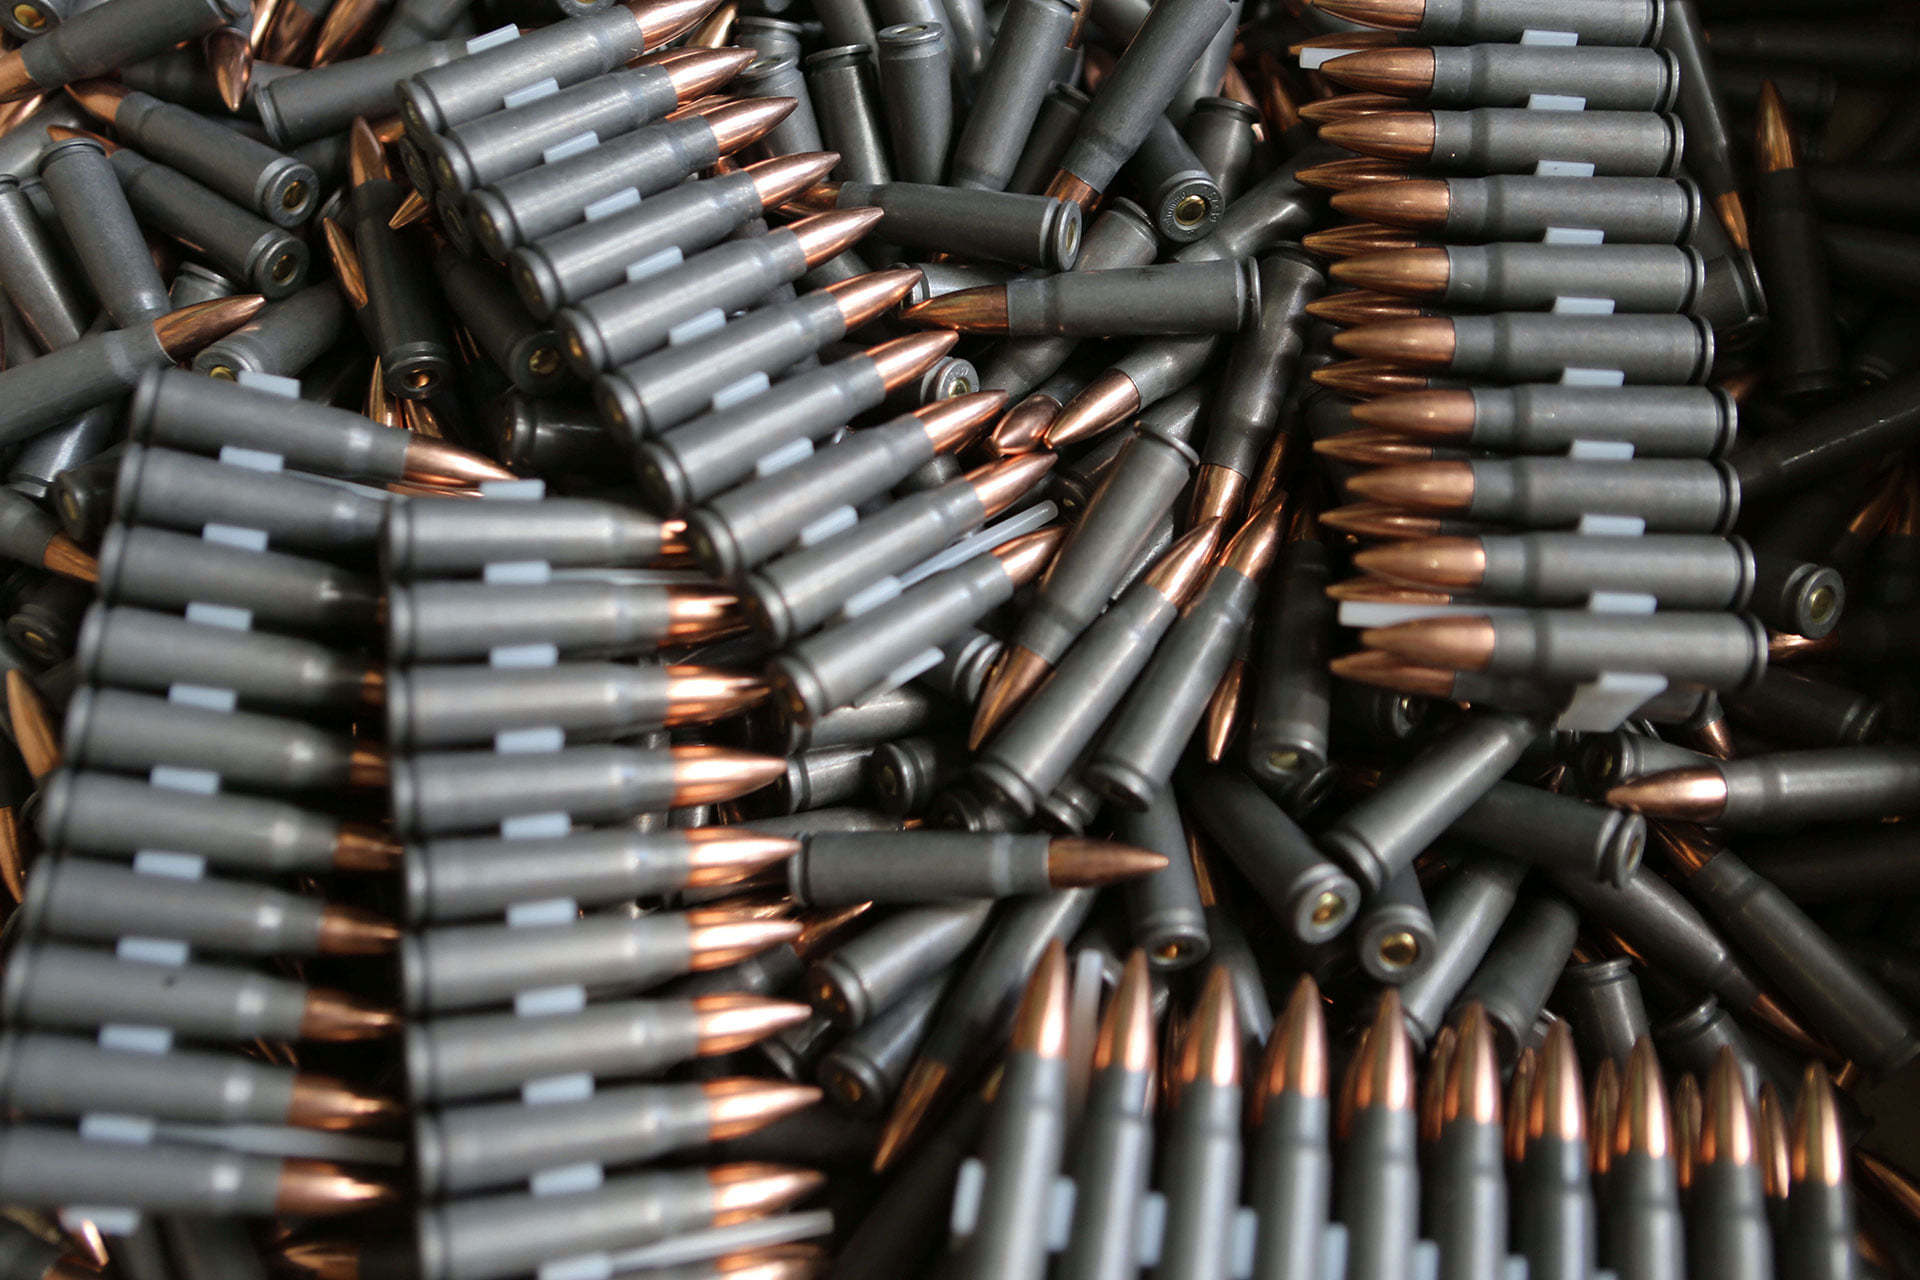 Finished products, caliber cartridges 7.62 mm